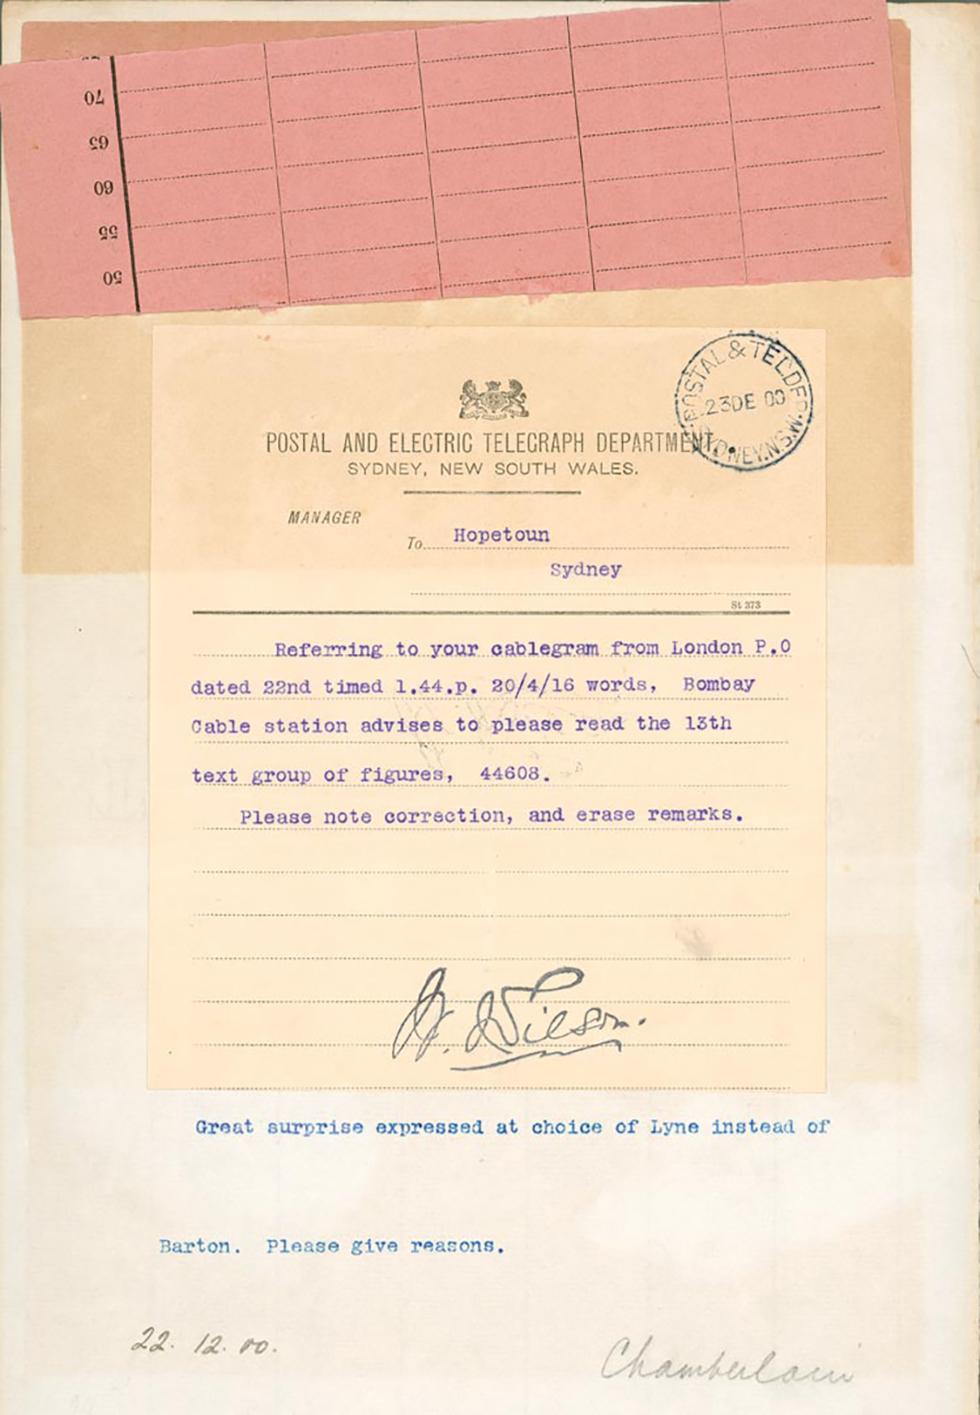 Telegram sent to Australia's Governor-General Designate querying the selection of Australia's first prime minister.